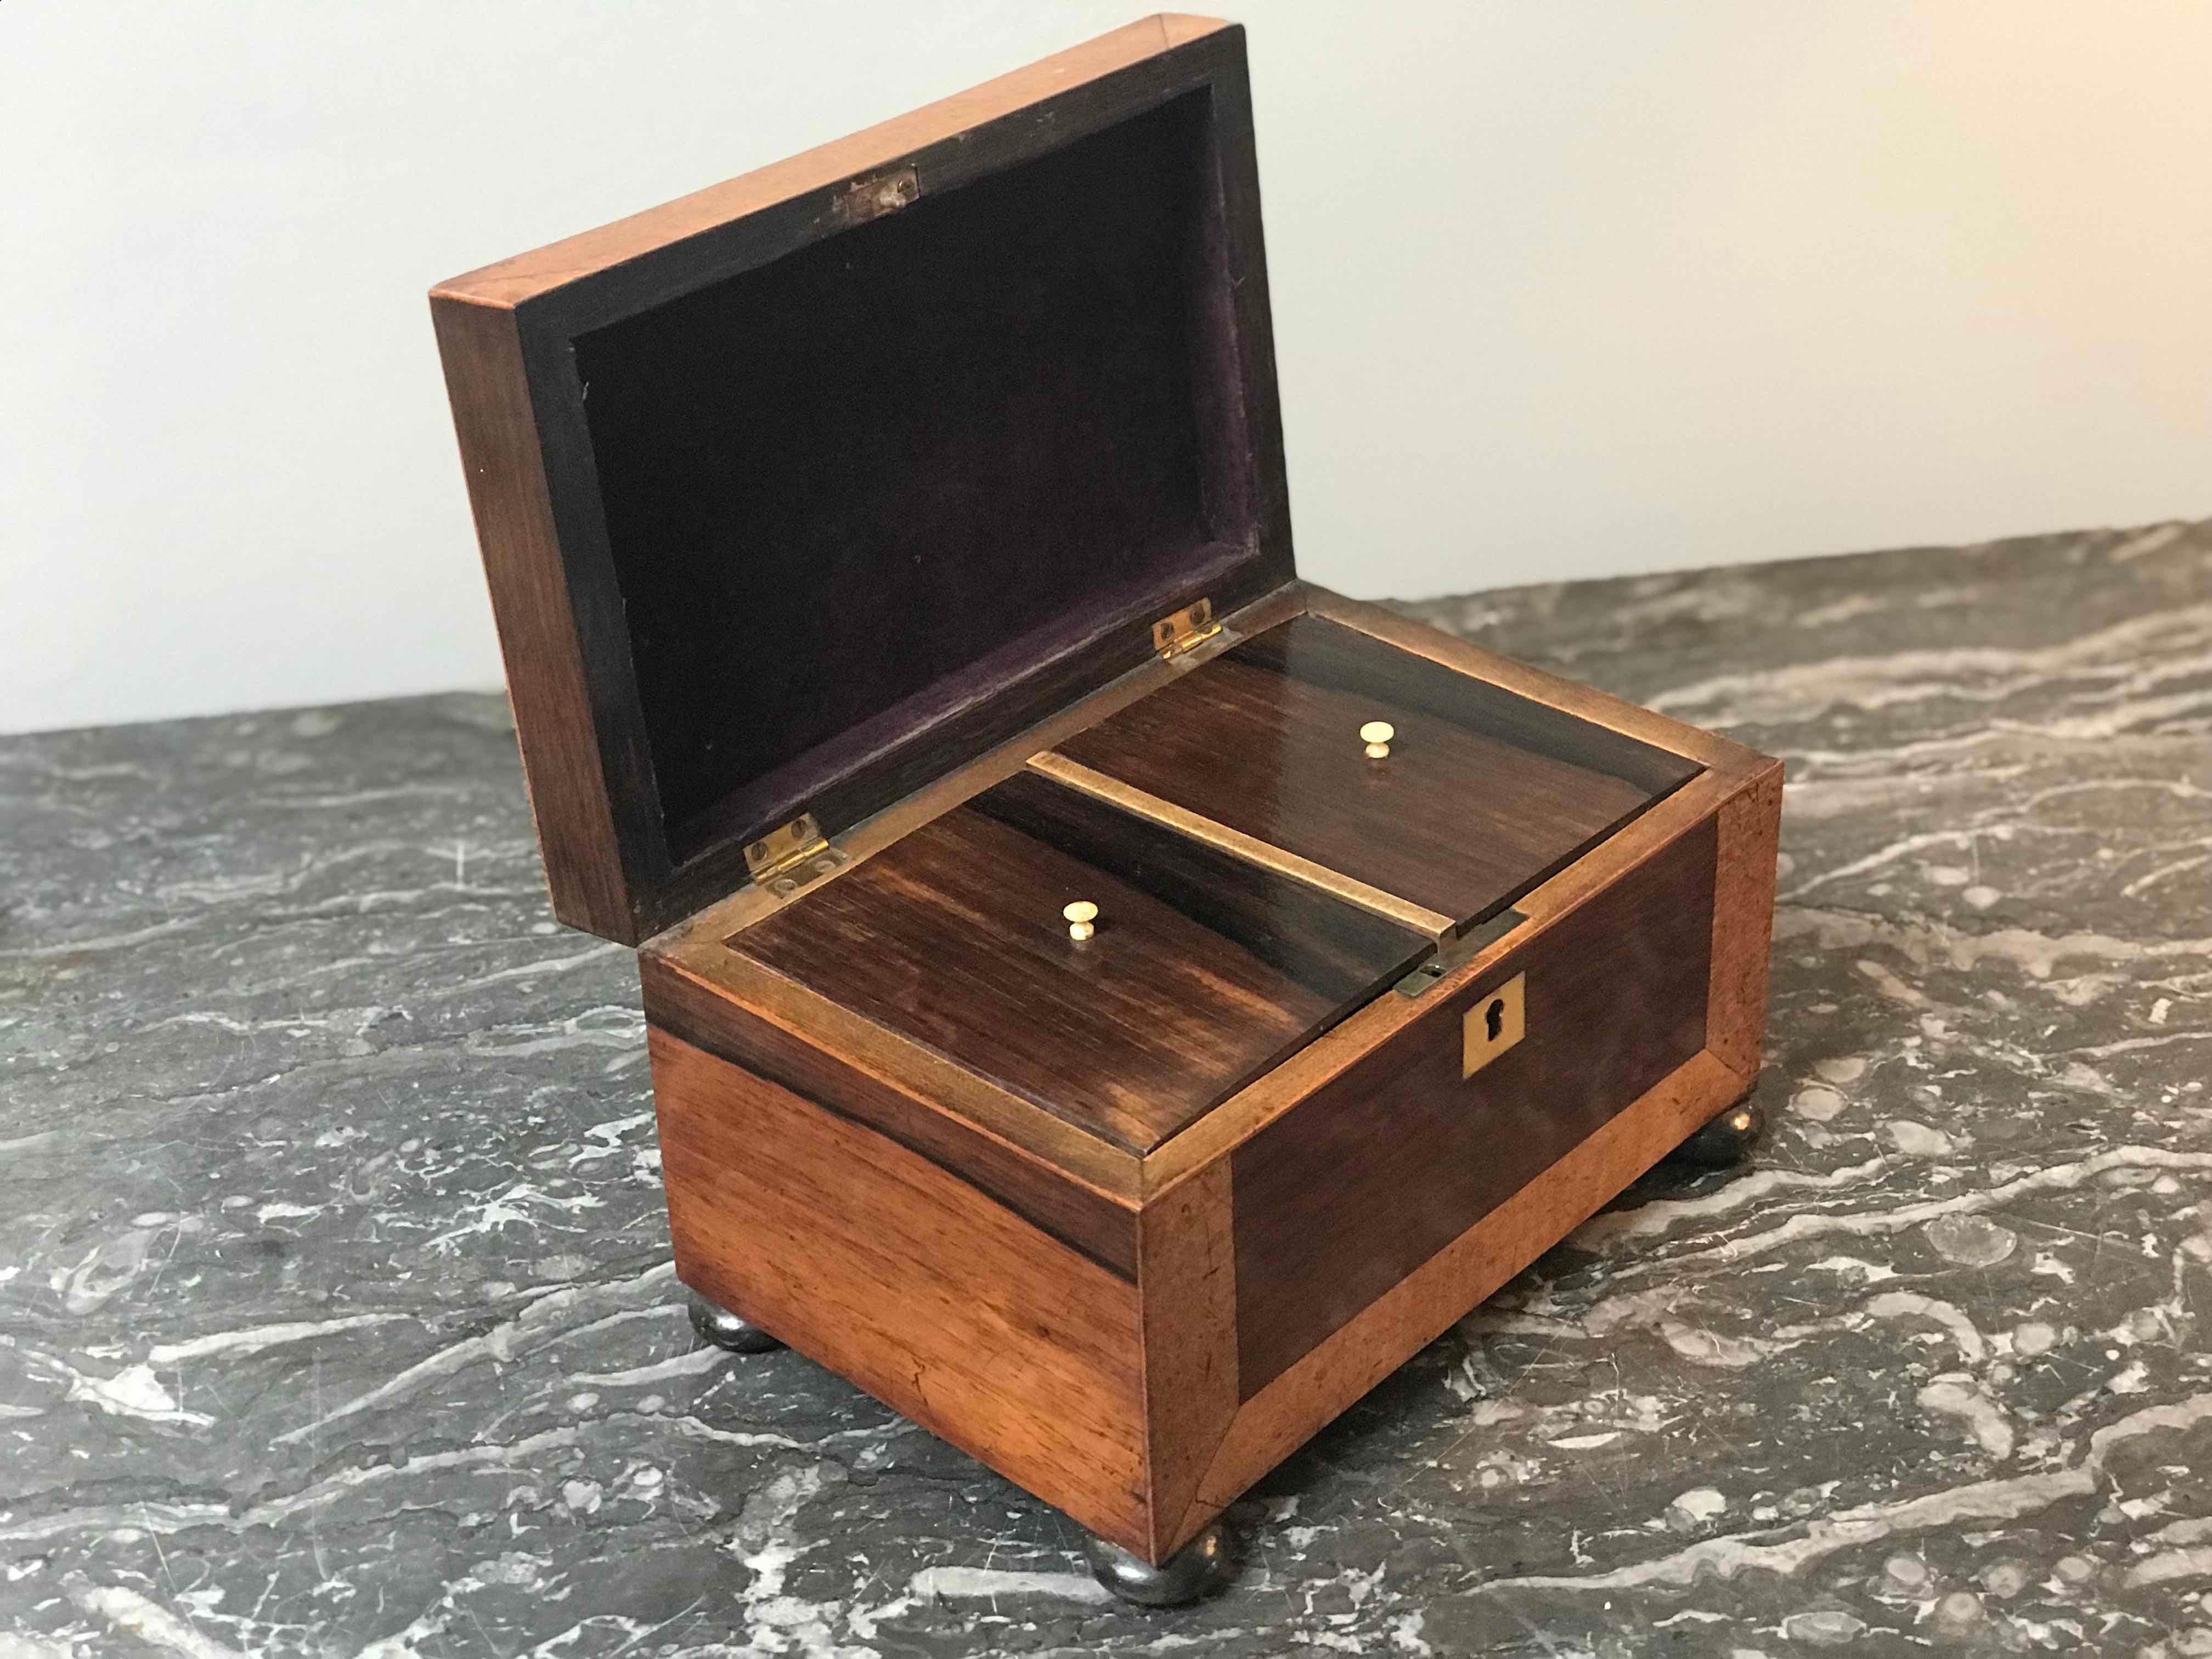 English Boxwood Tea Caddy from Early 19th Century England